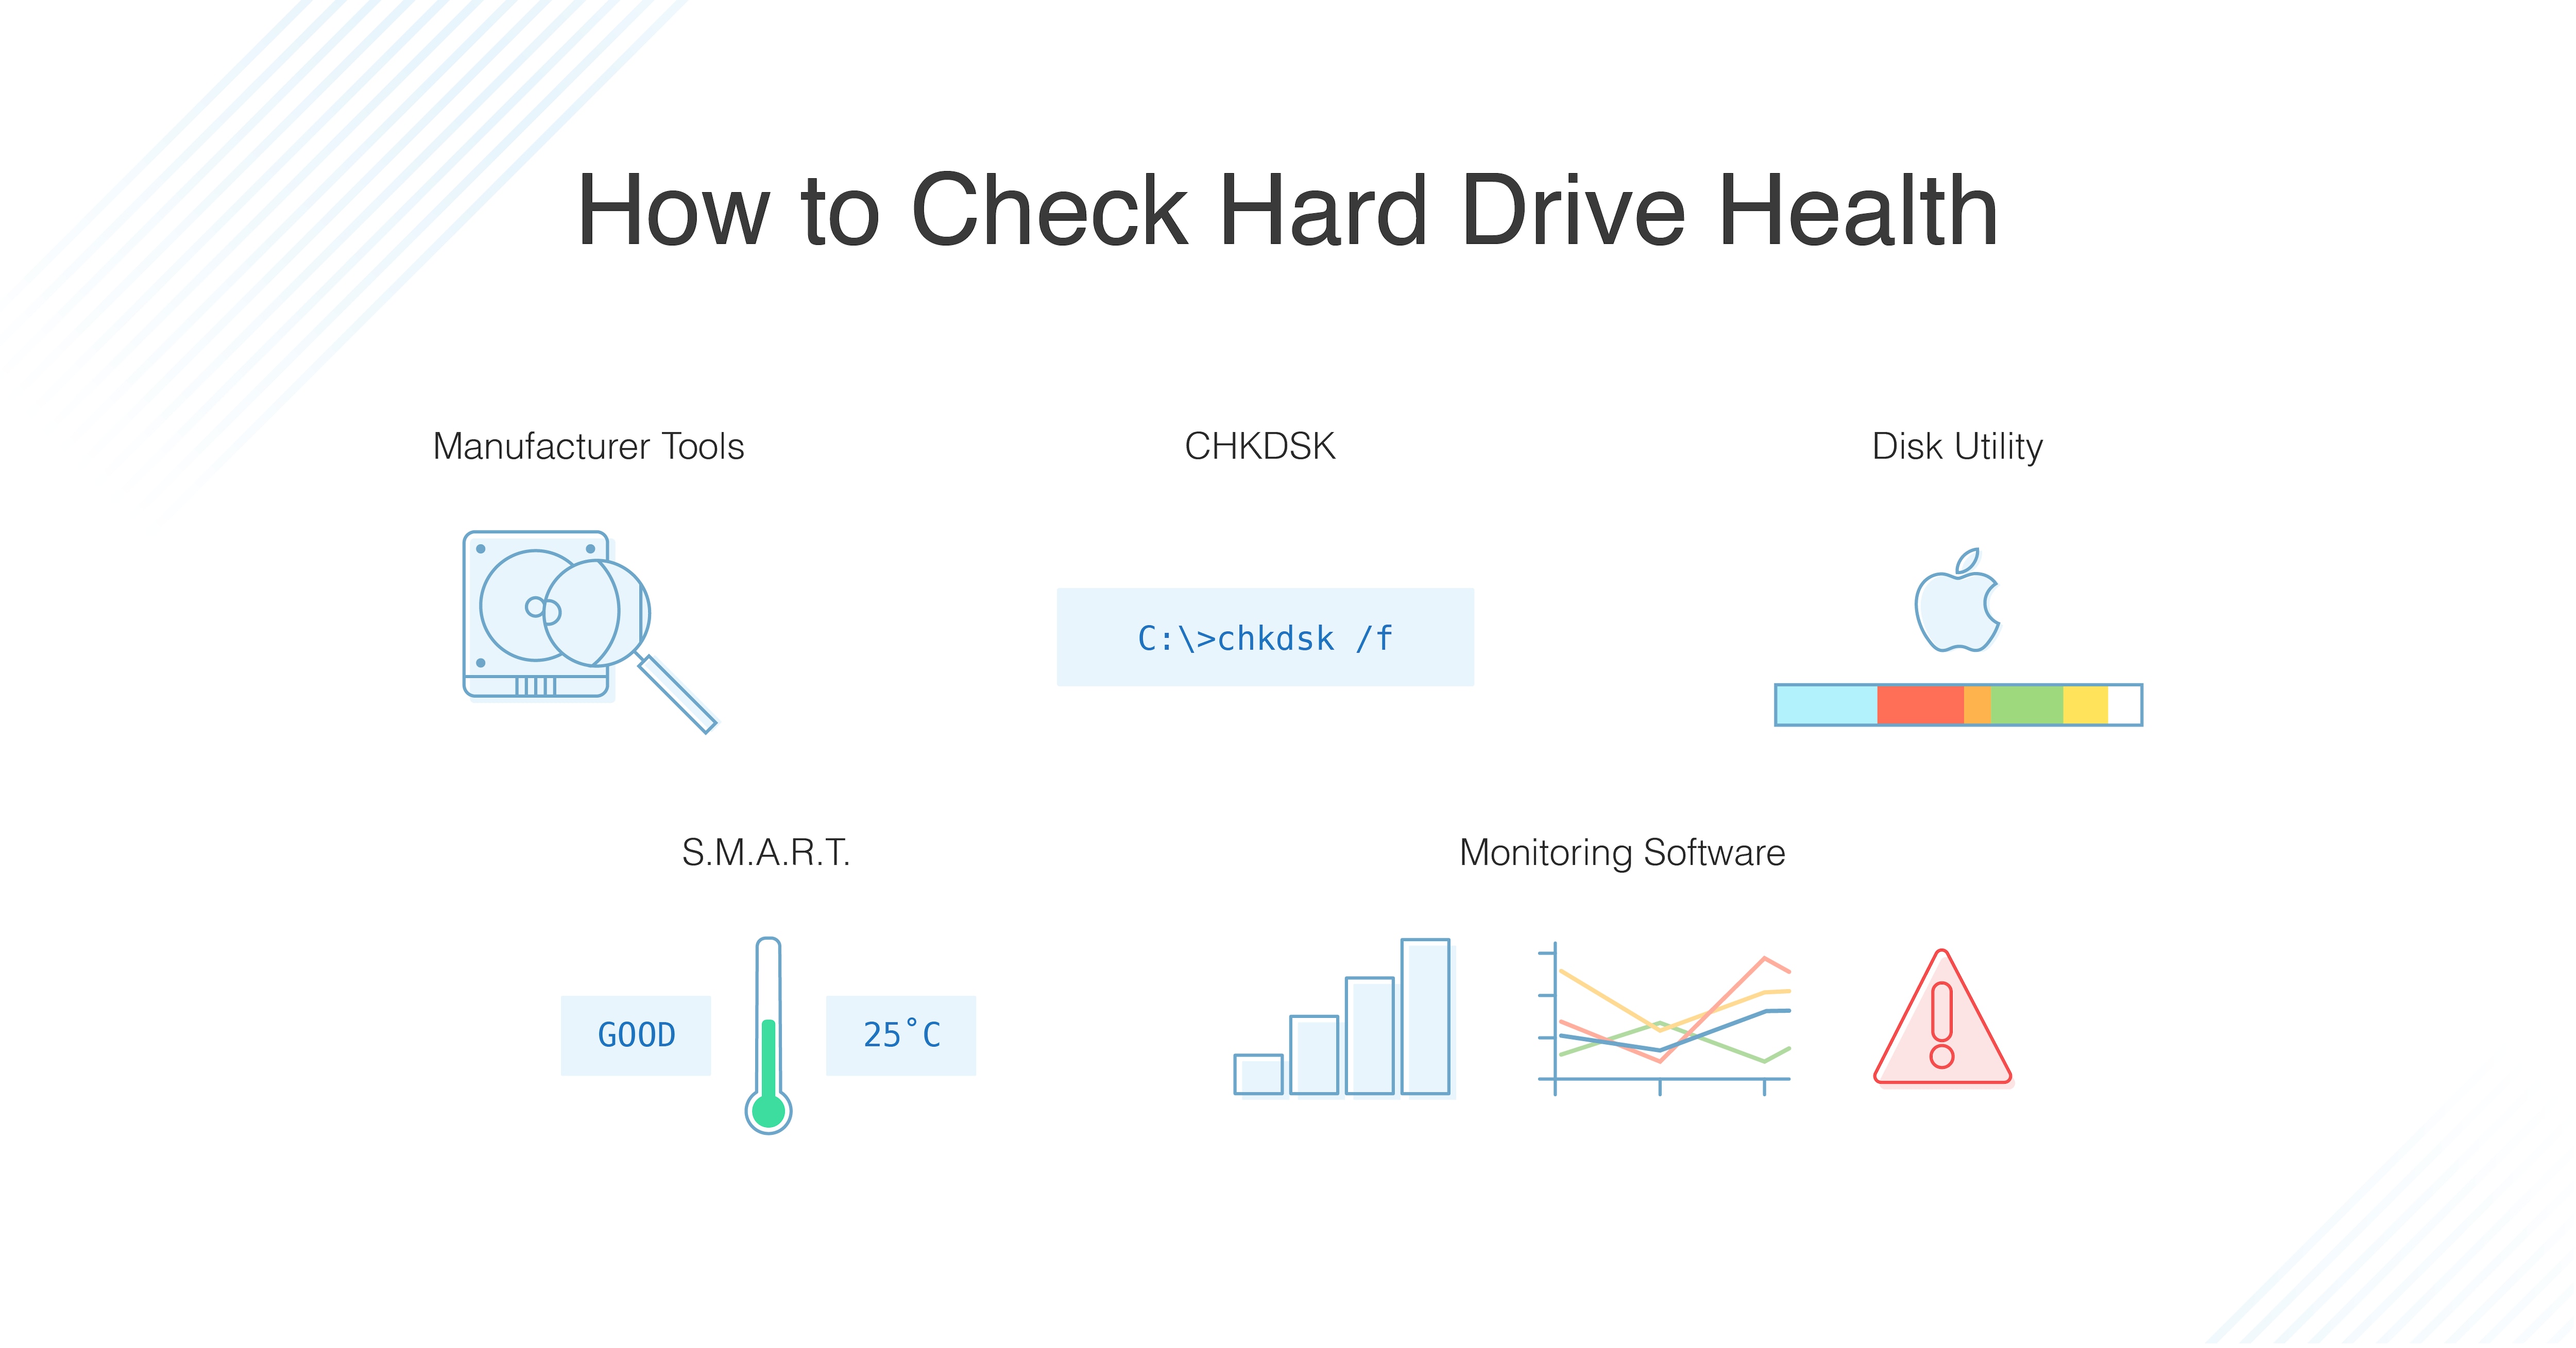 How to Drive Health 2020 - DNSstuff